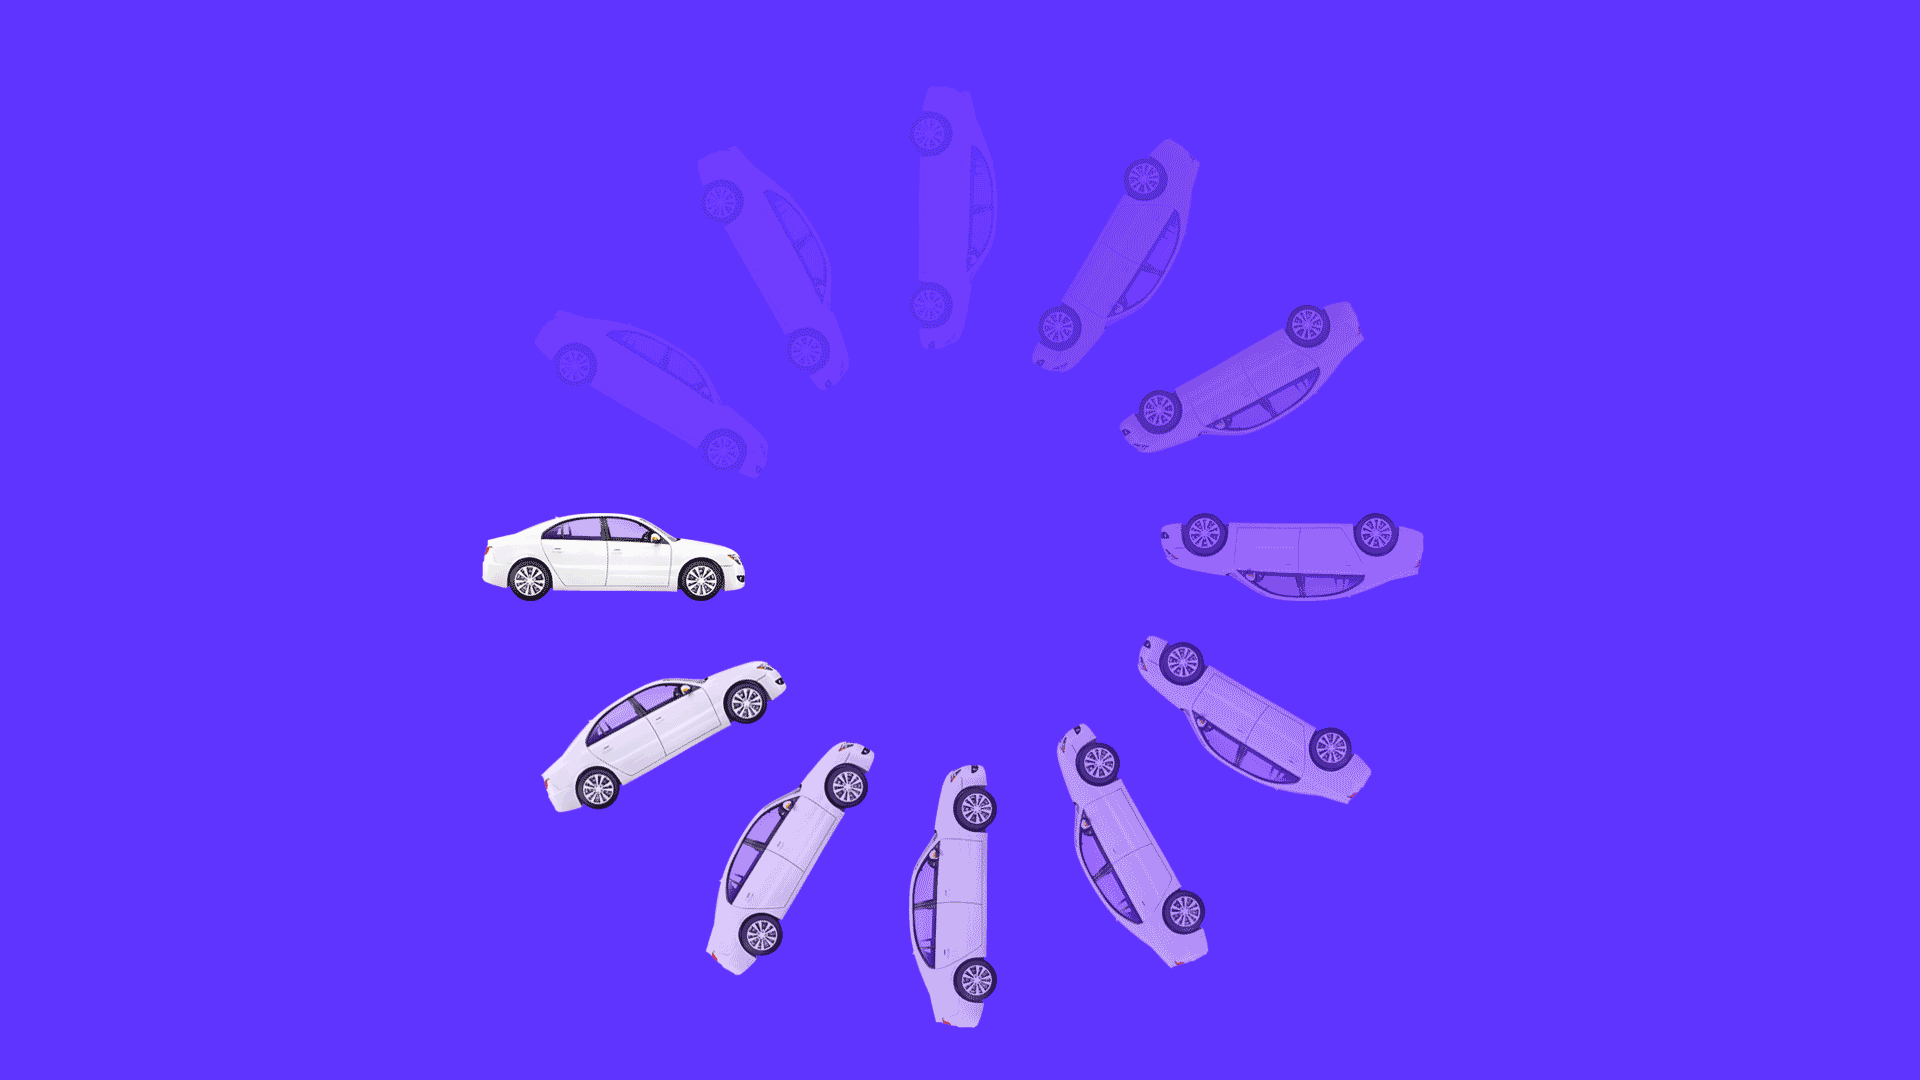 Gif of cars spinning in a circle